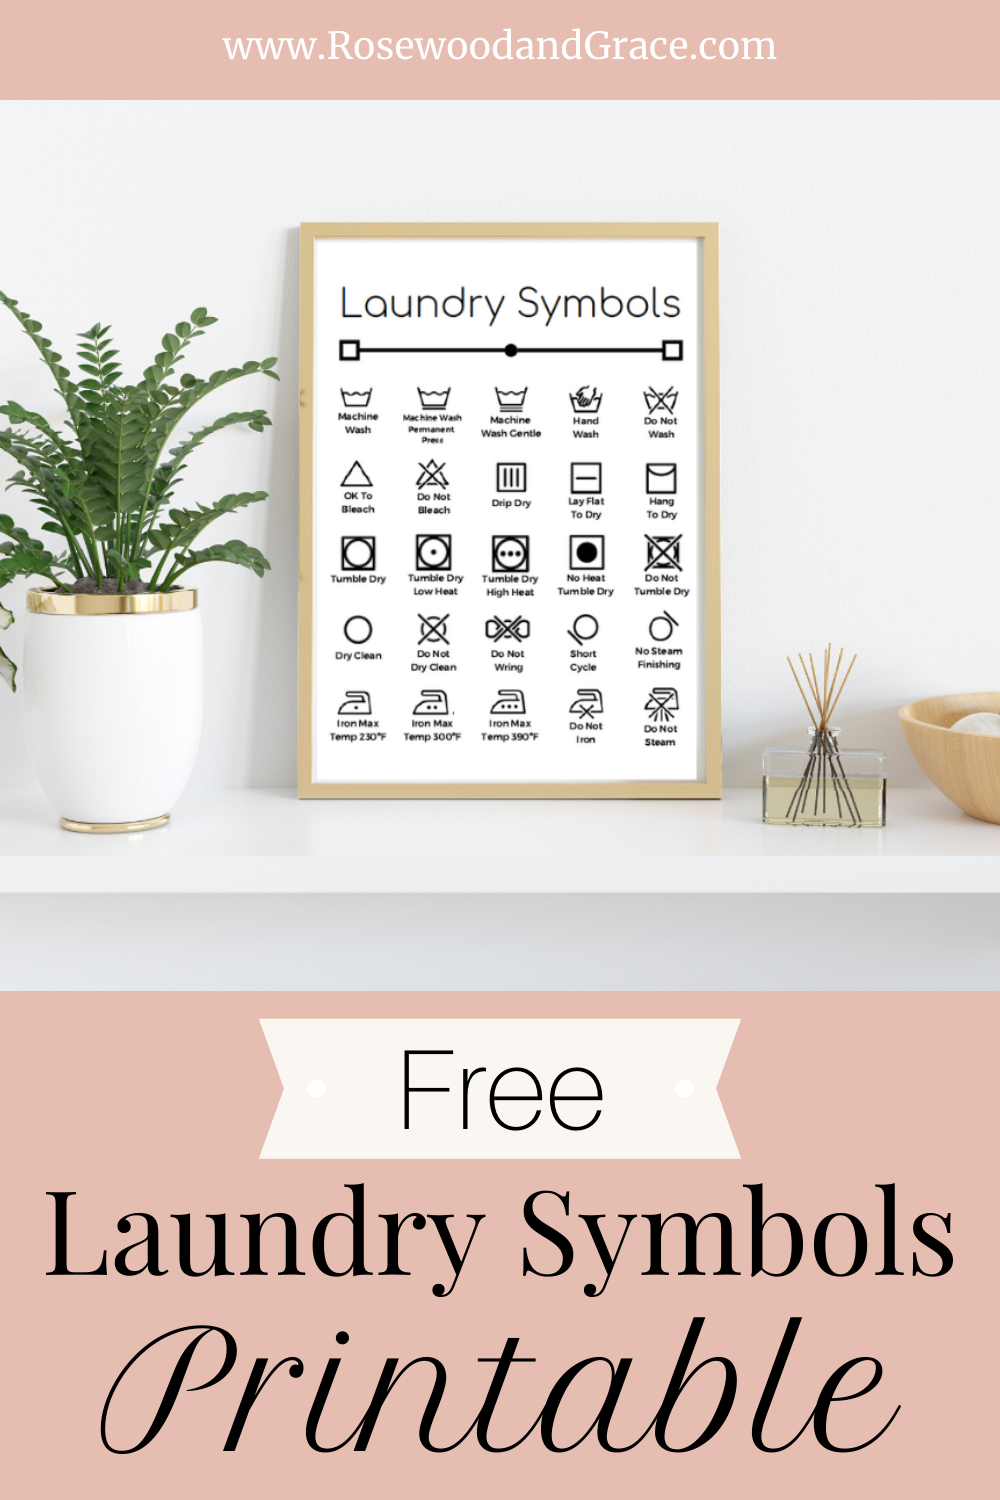 free-laundry-printable-rosewood-and-grace